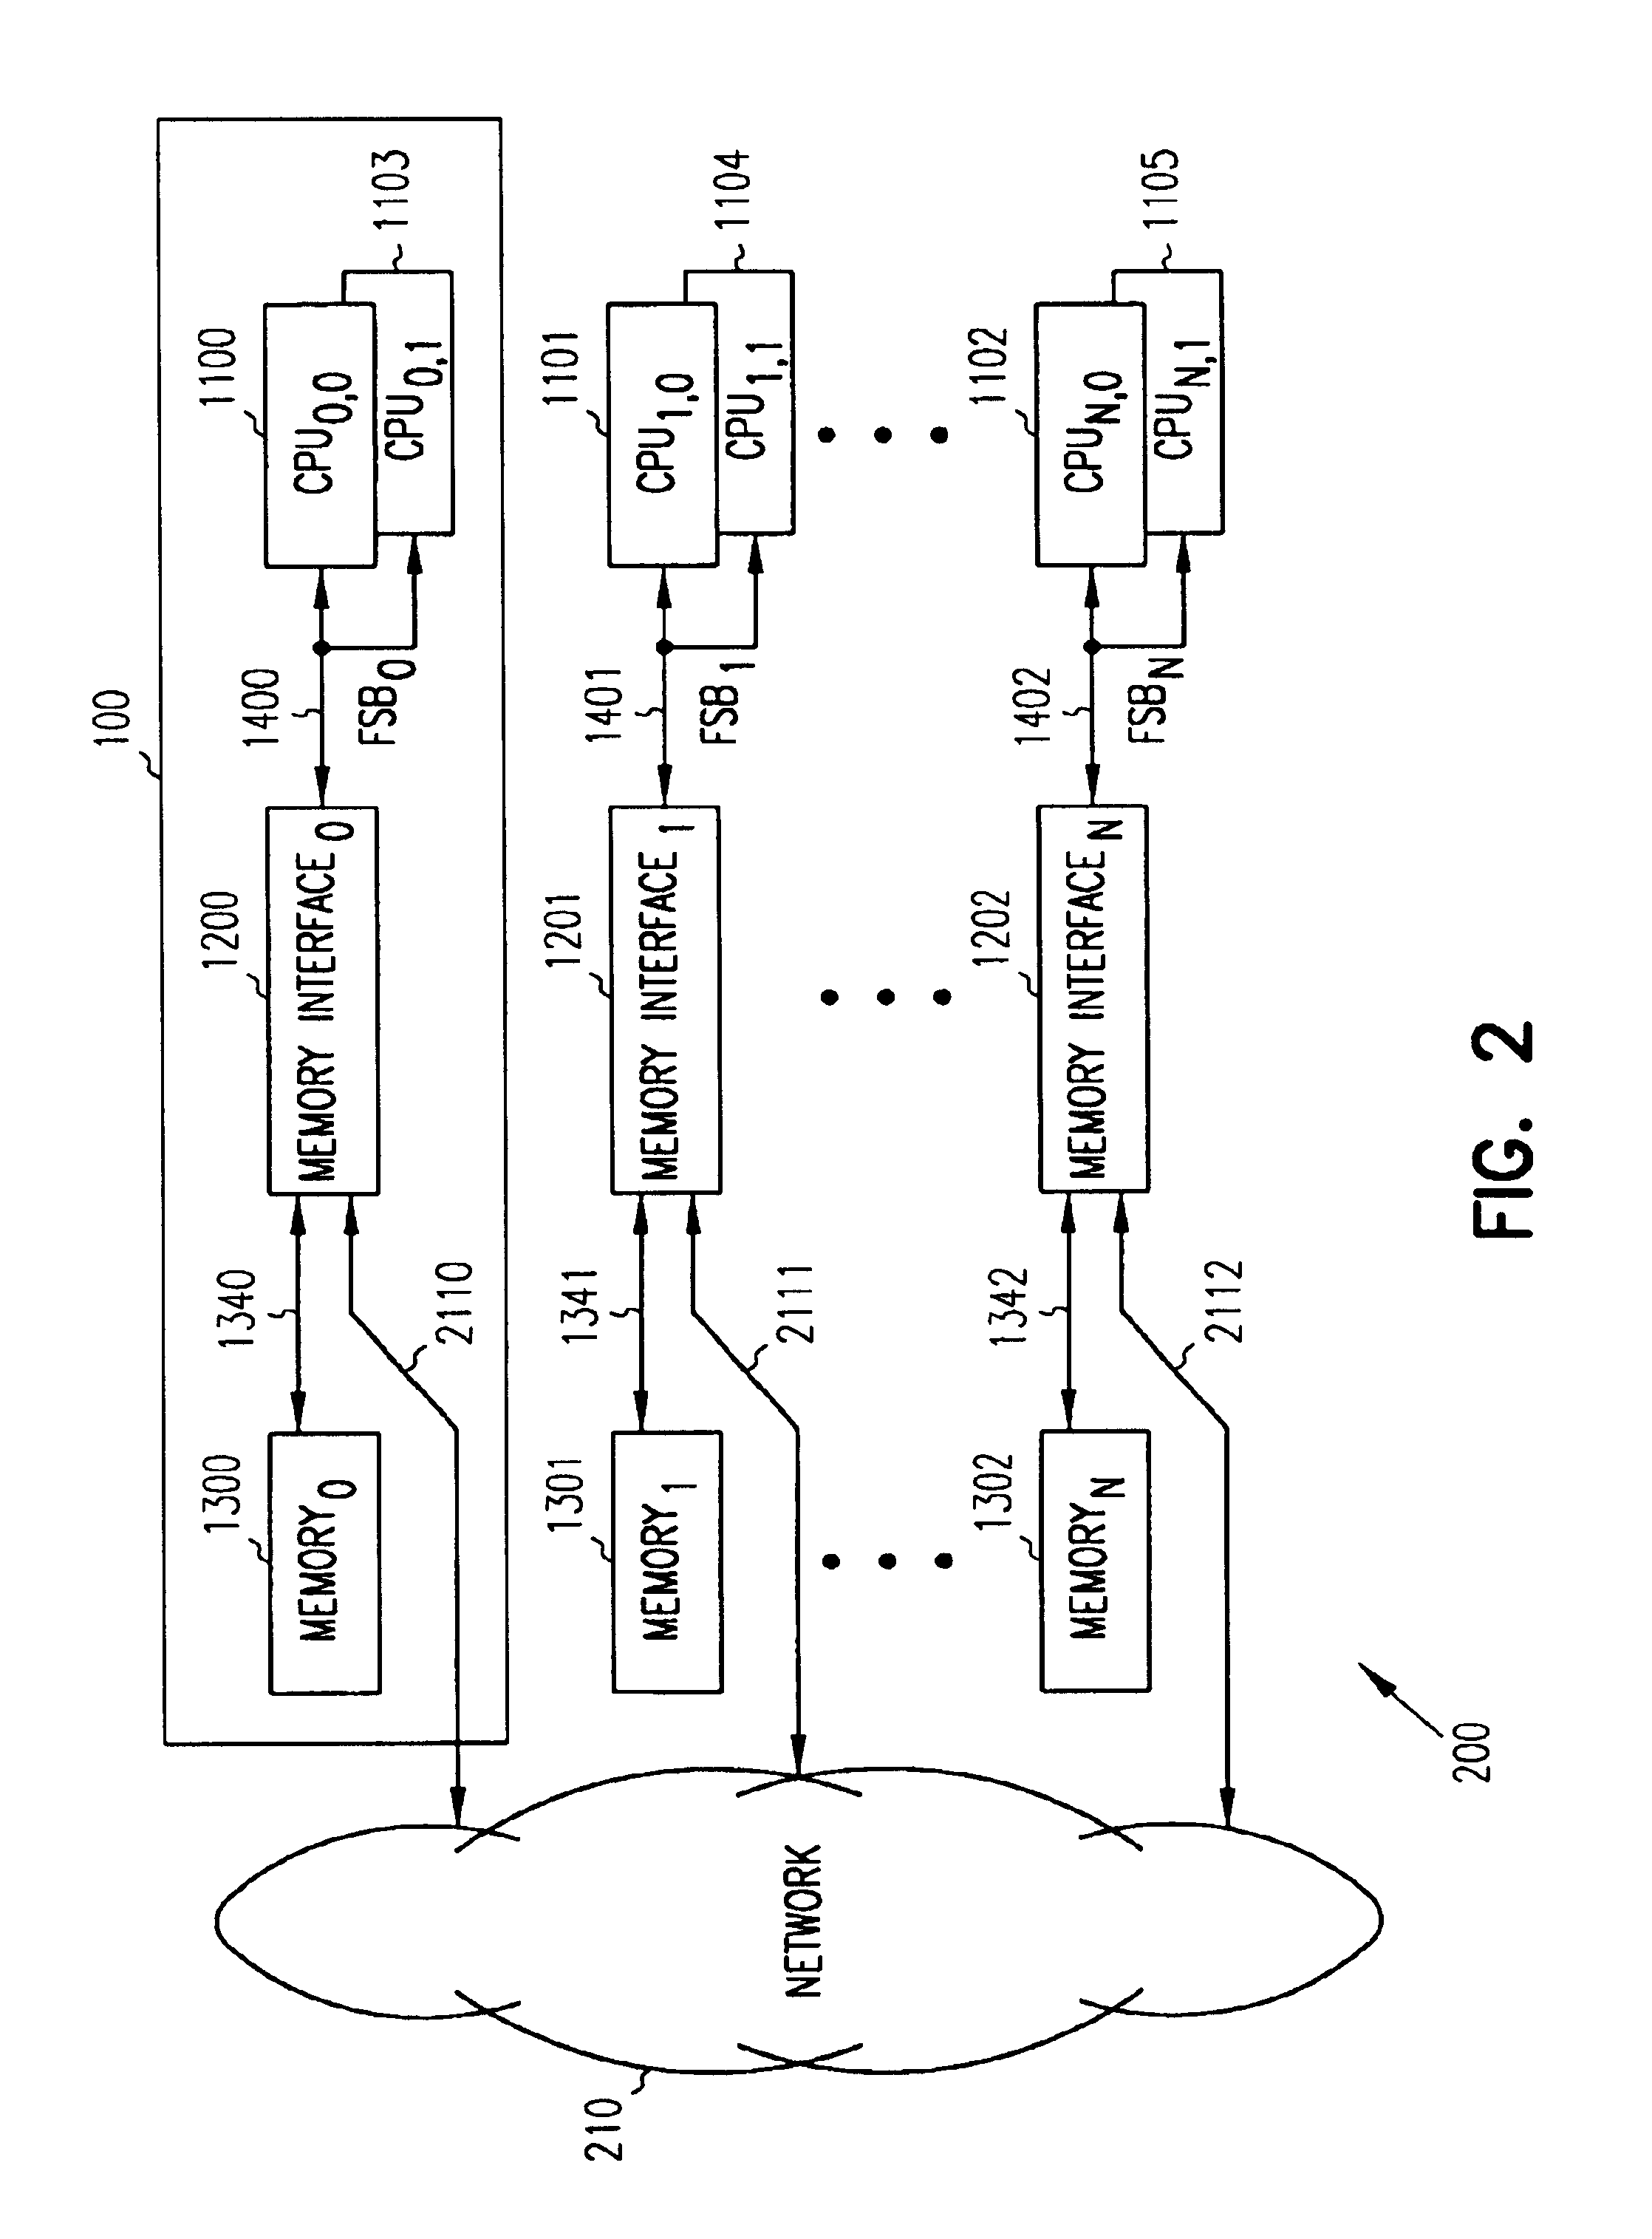 Method and circuit for reliable data capture in the presence of bus-master changeovers